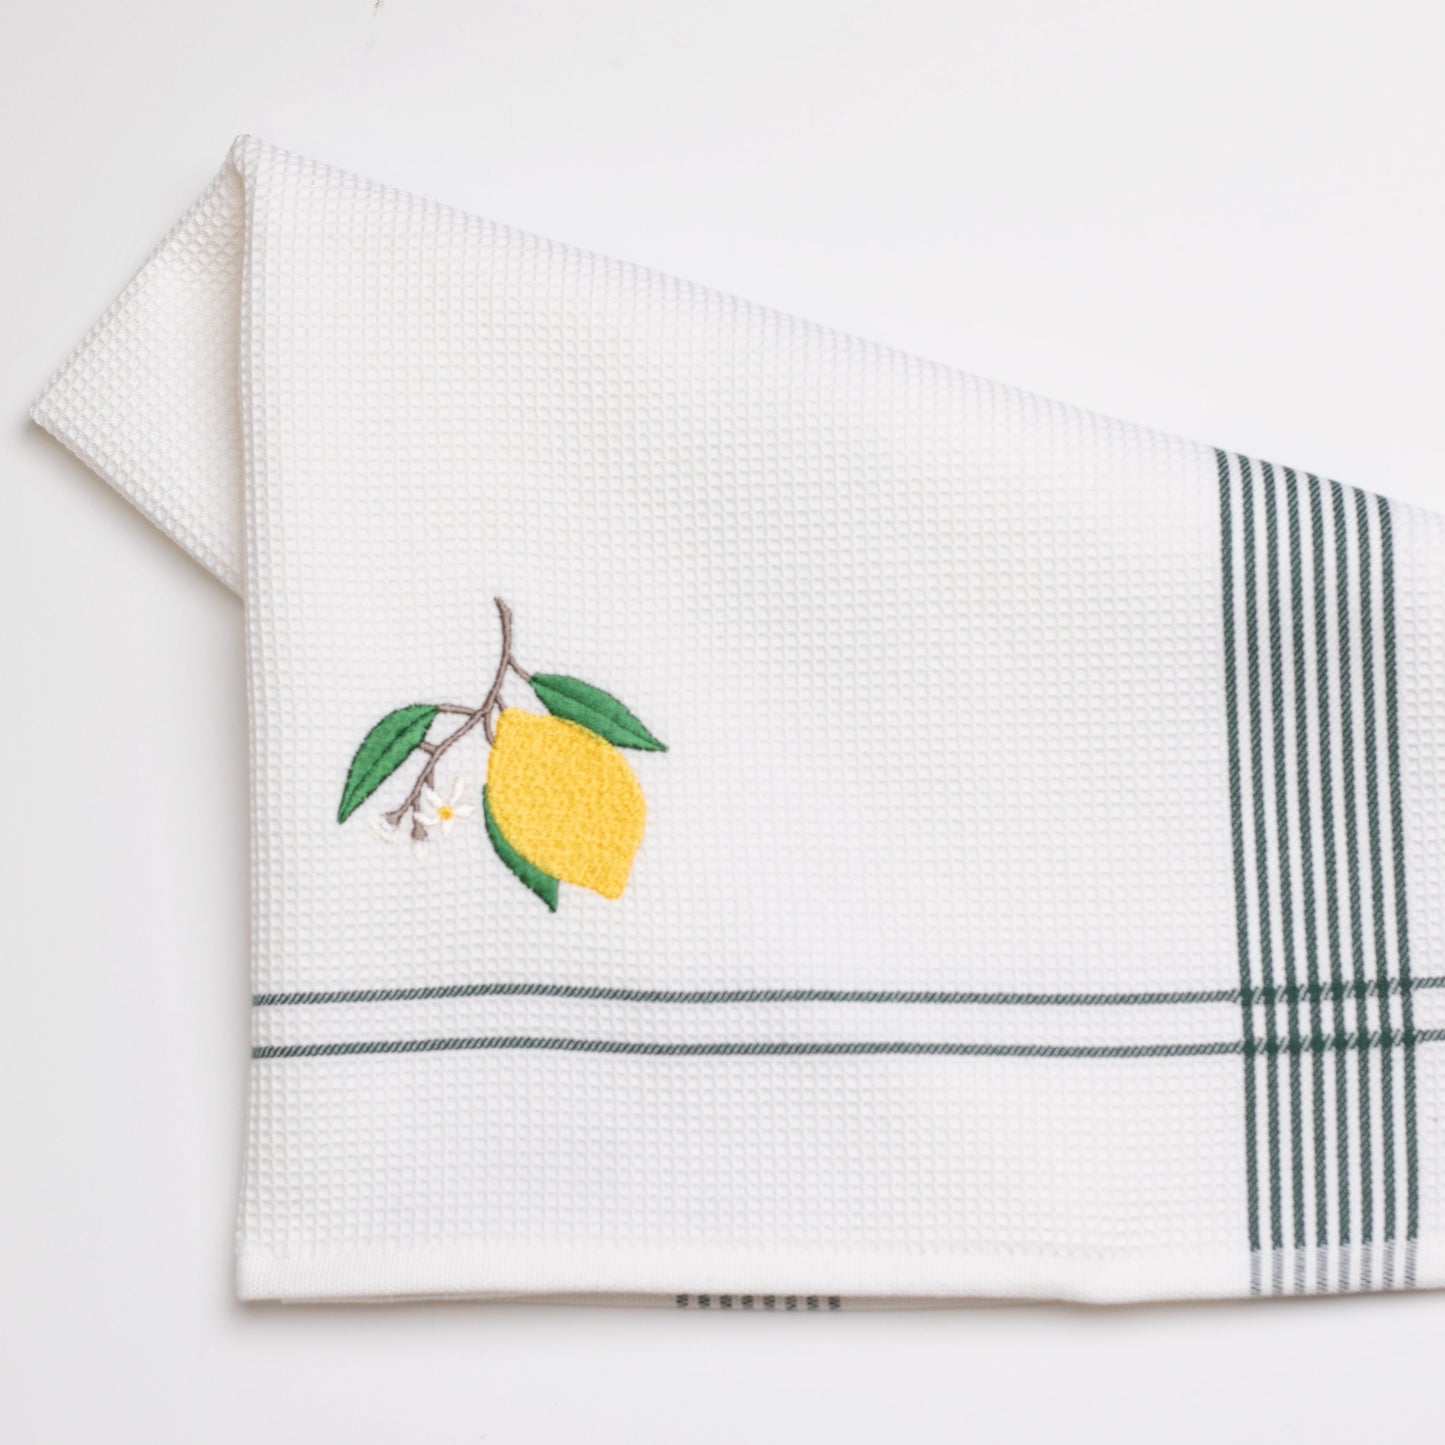 Luxury Tea Towel with Embroidery 100% Cotton